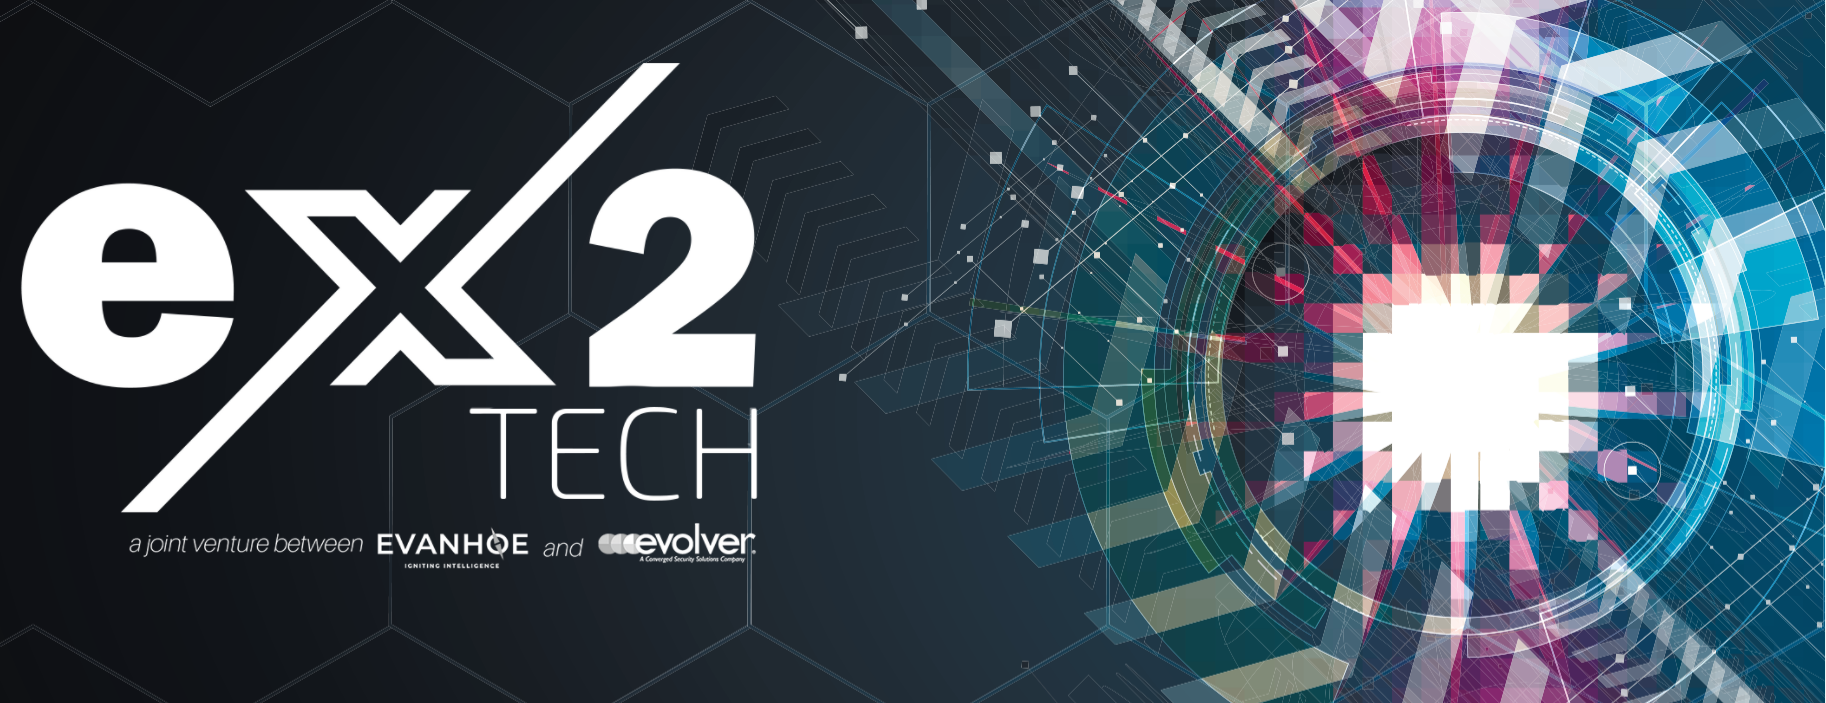 EVANHOE AND EVOLVER FORM EX2 TECH JOINT VENTURE